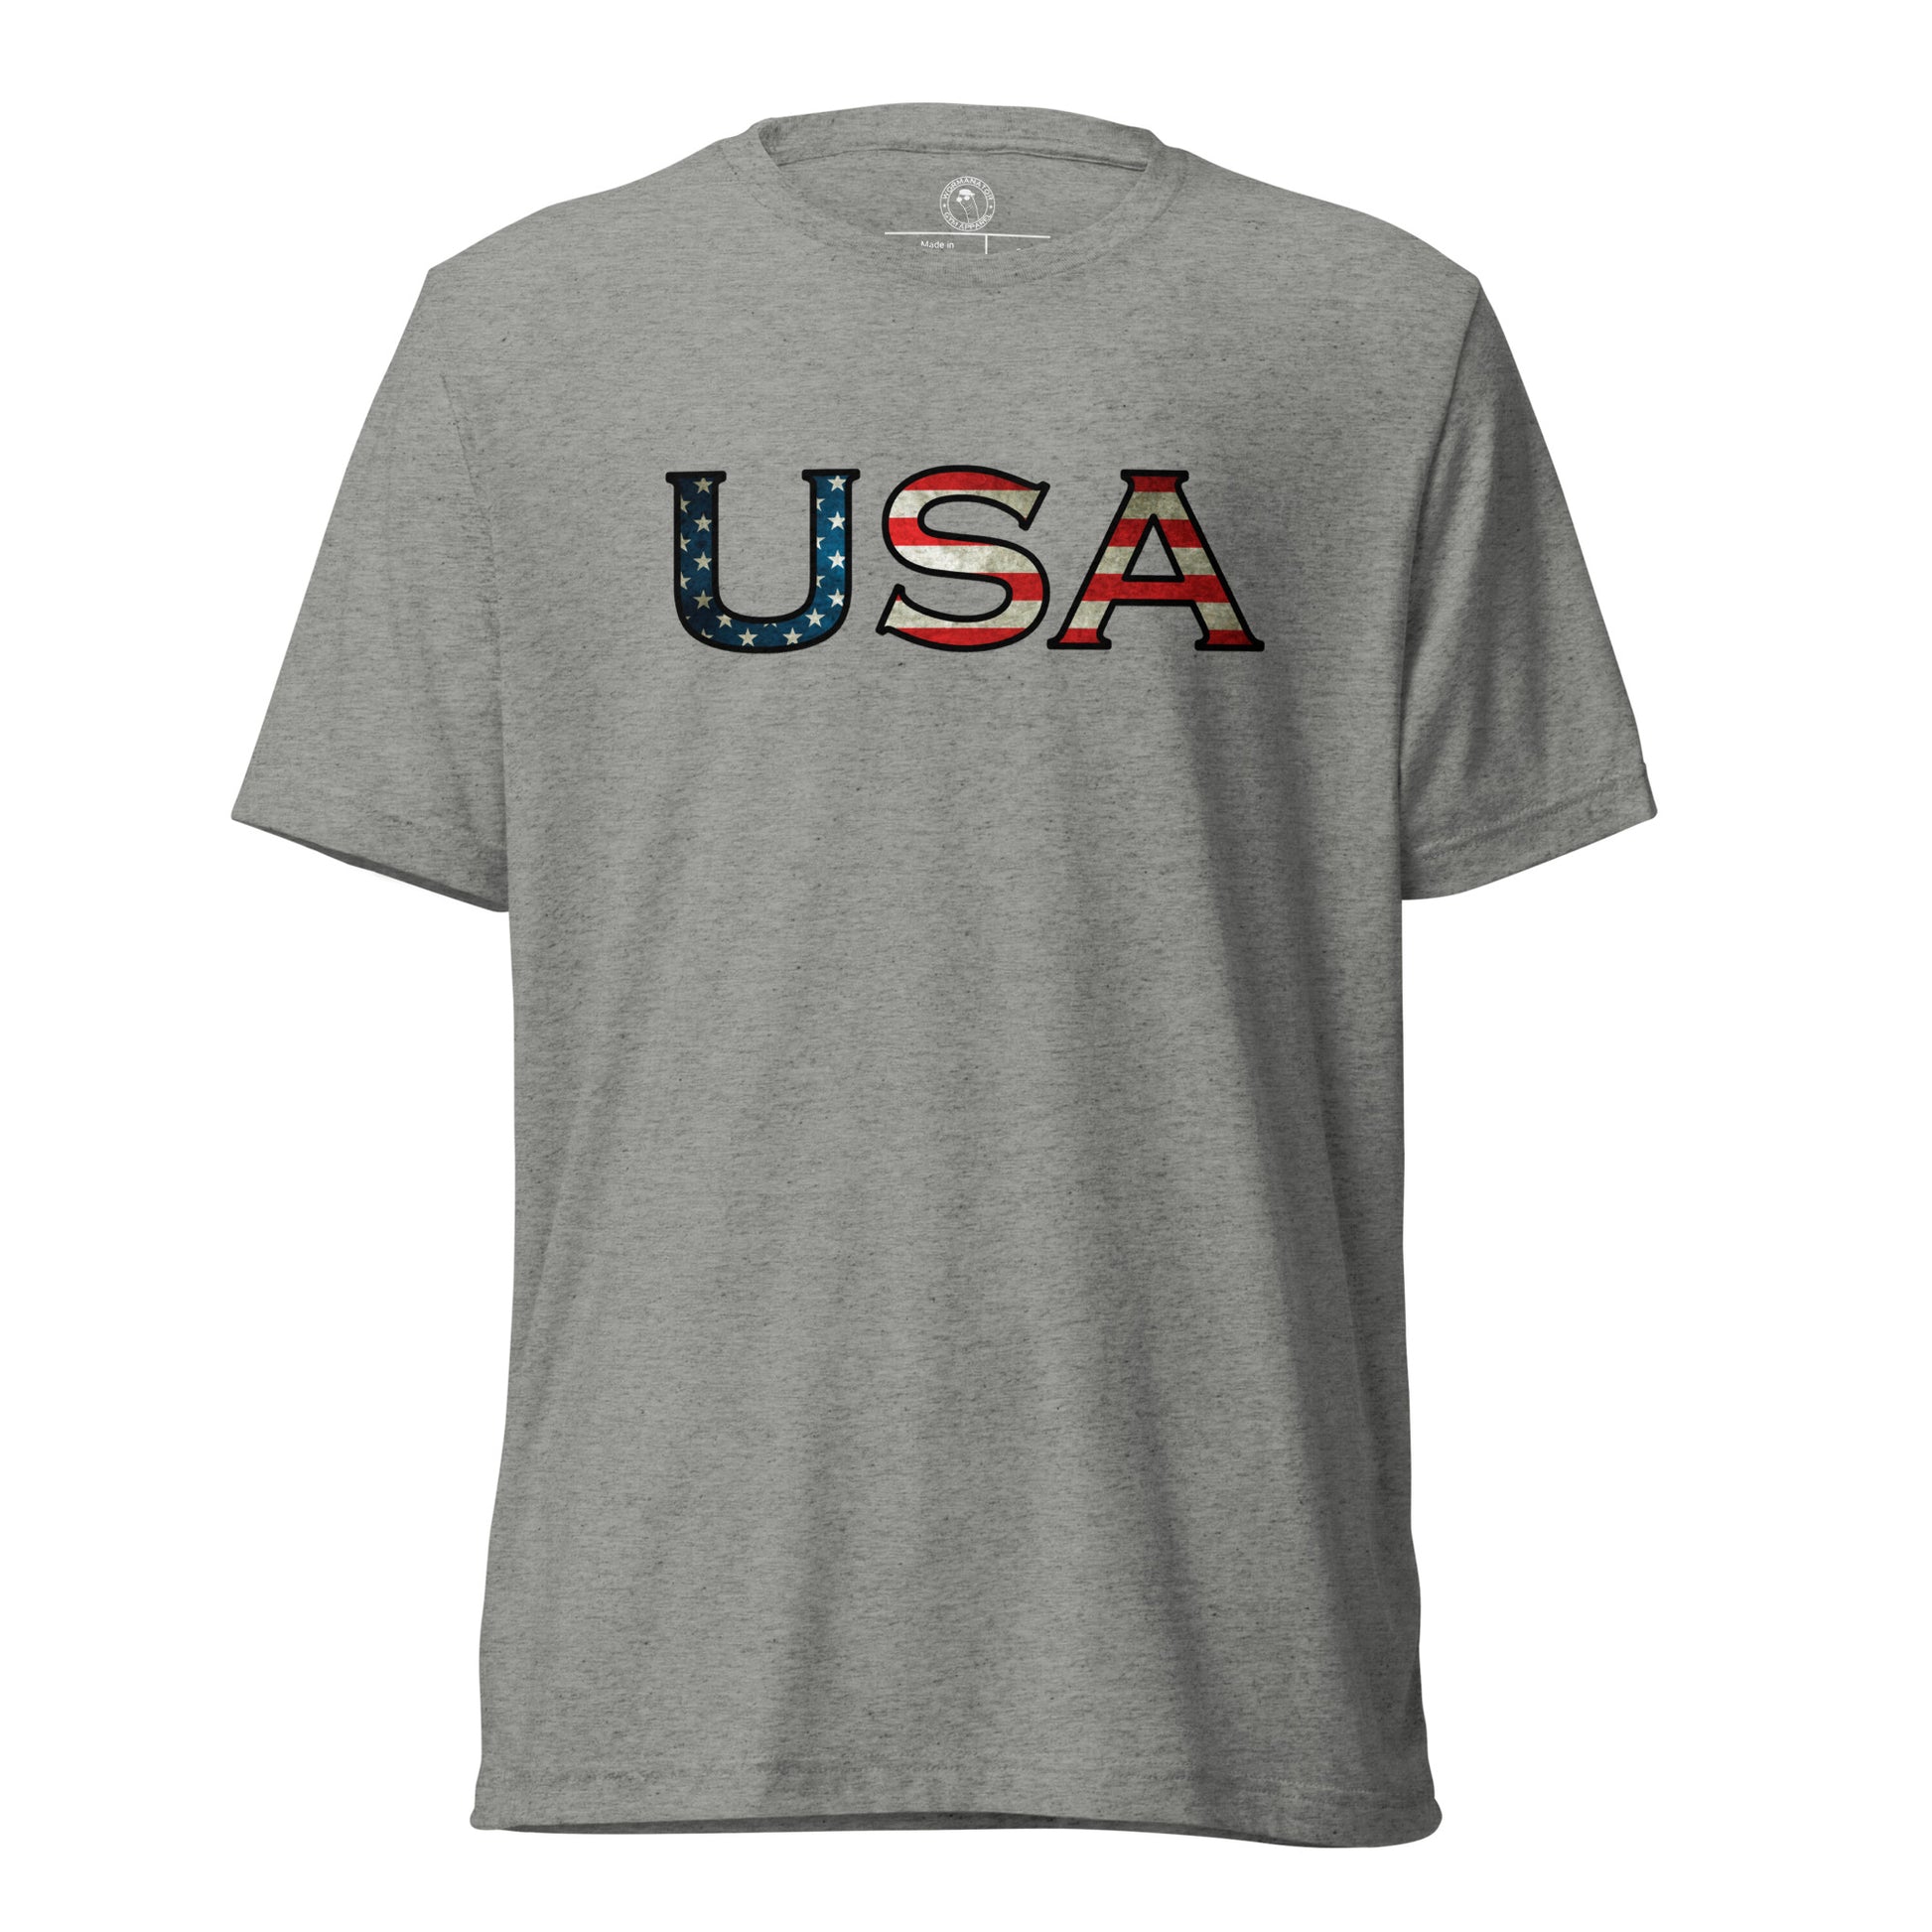 USA T-Shirt in Athletic Grey Triblend